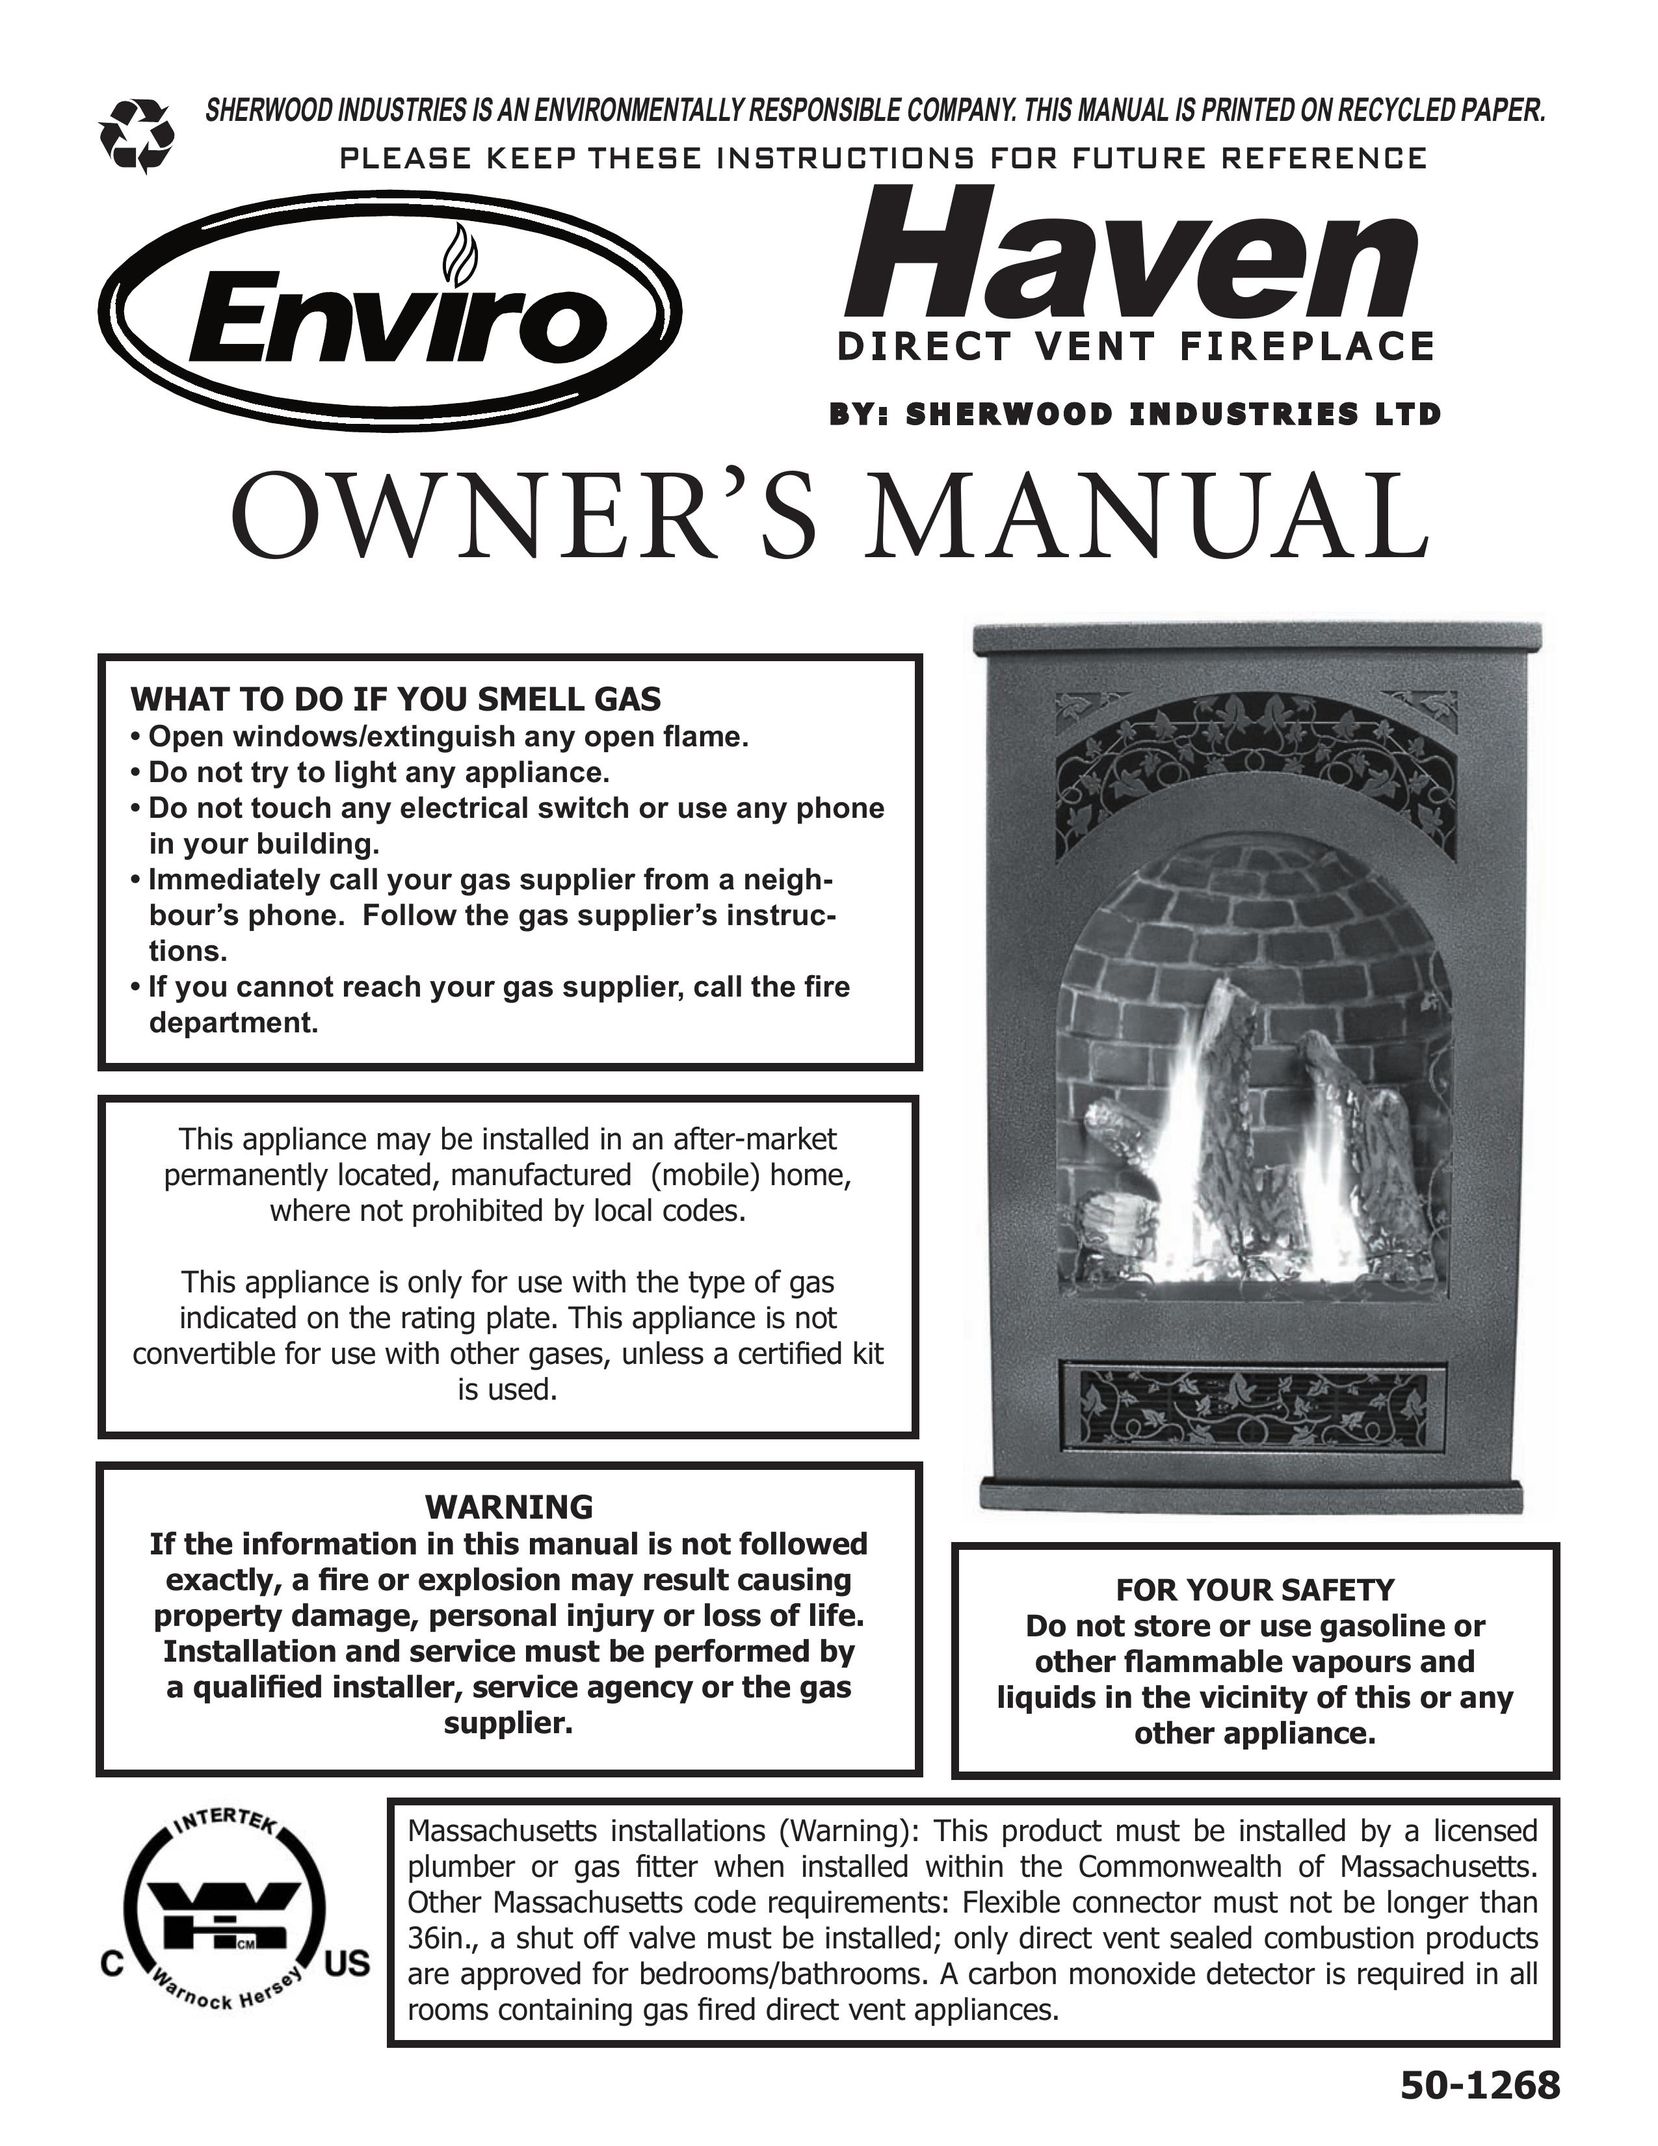 Enviro Haven Direct Vent Fireplace Indoor Fireplace User Manual